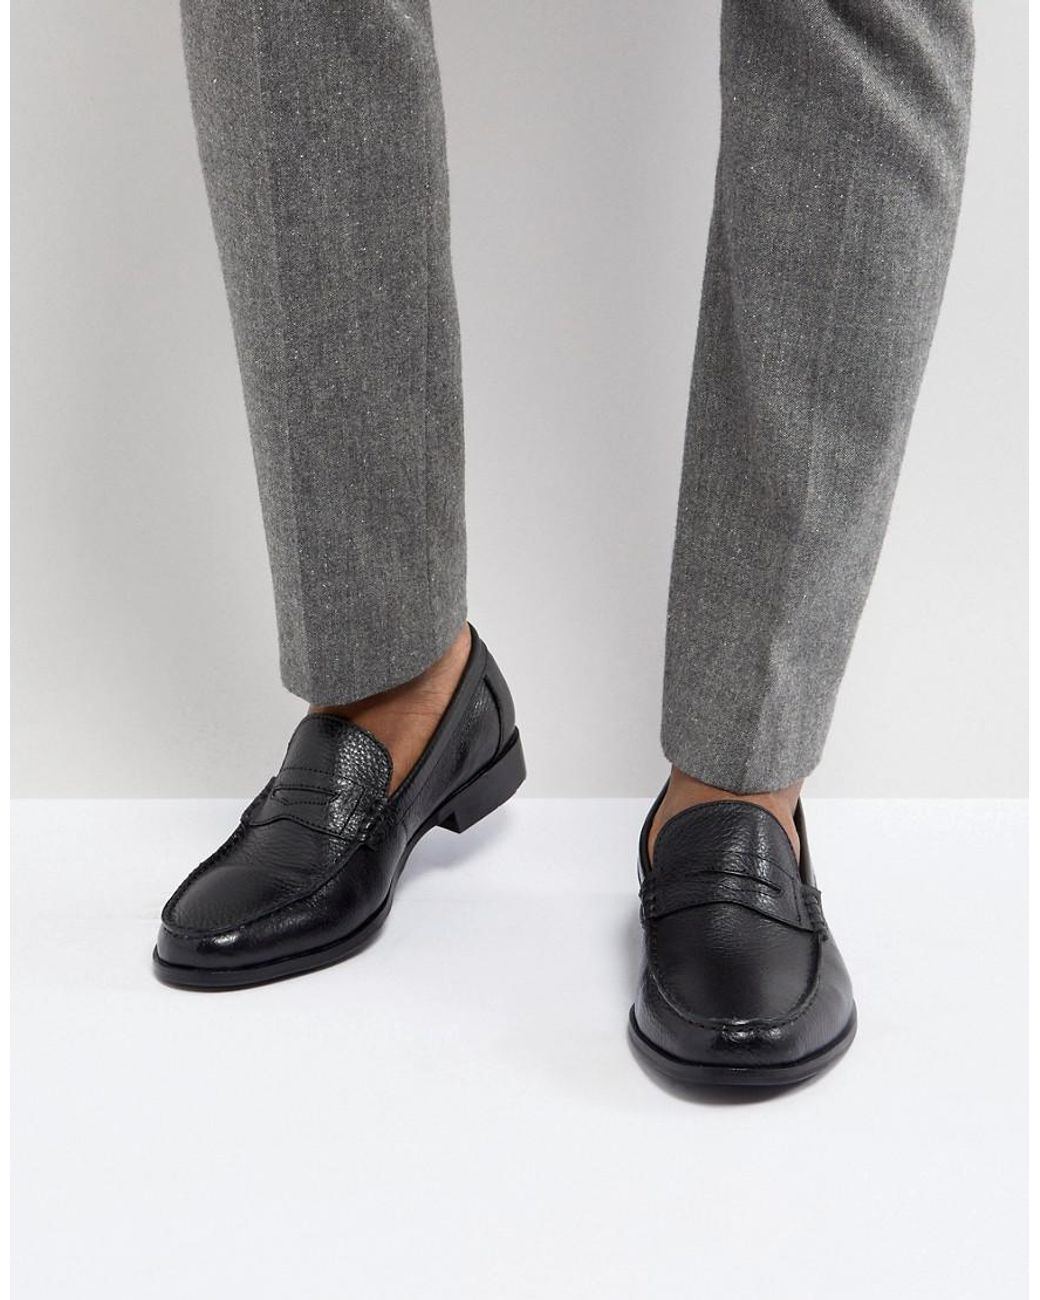 Ben Sherman Penny Loafers In Pebble Black Leather for Men | Lyst